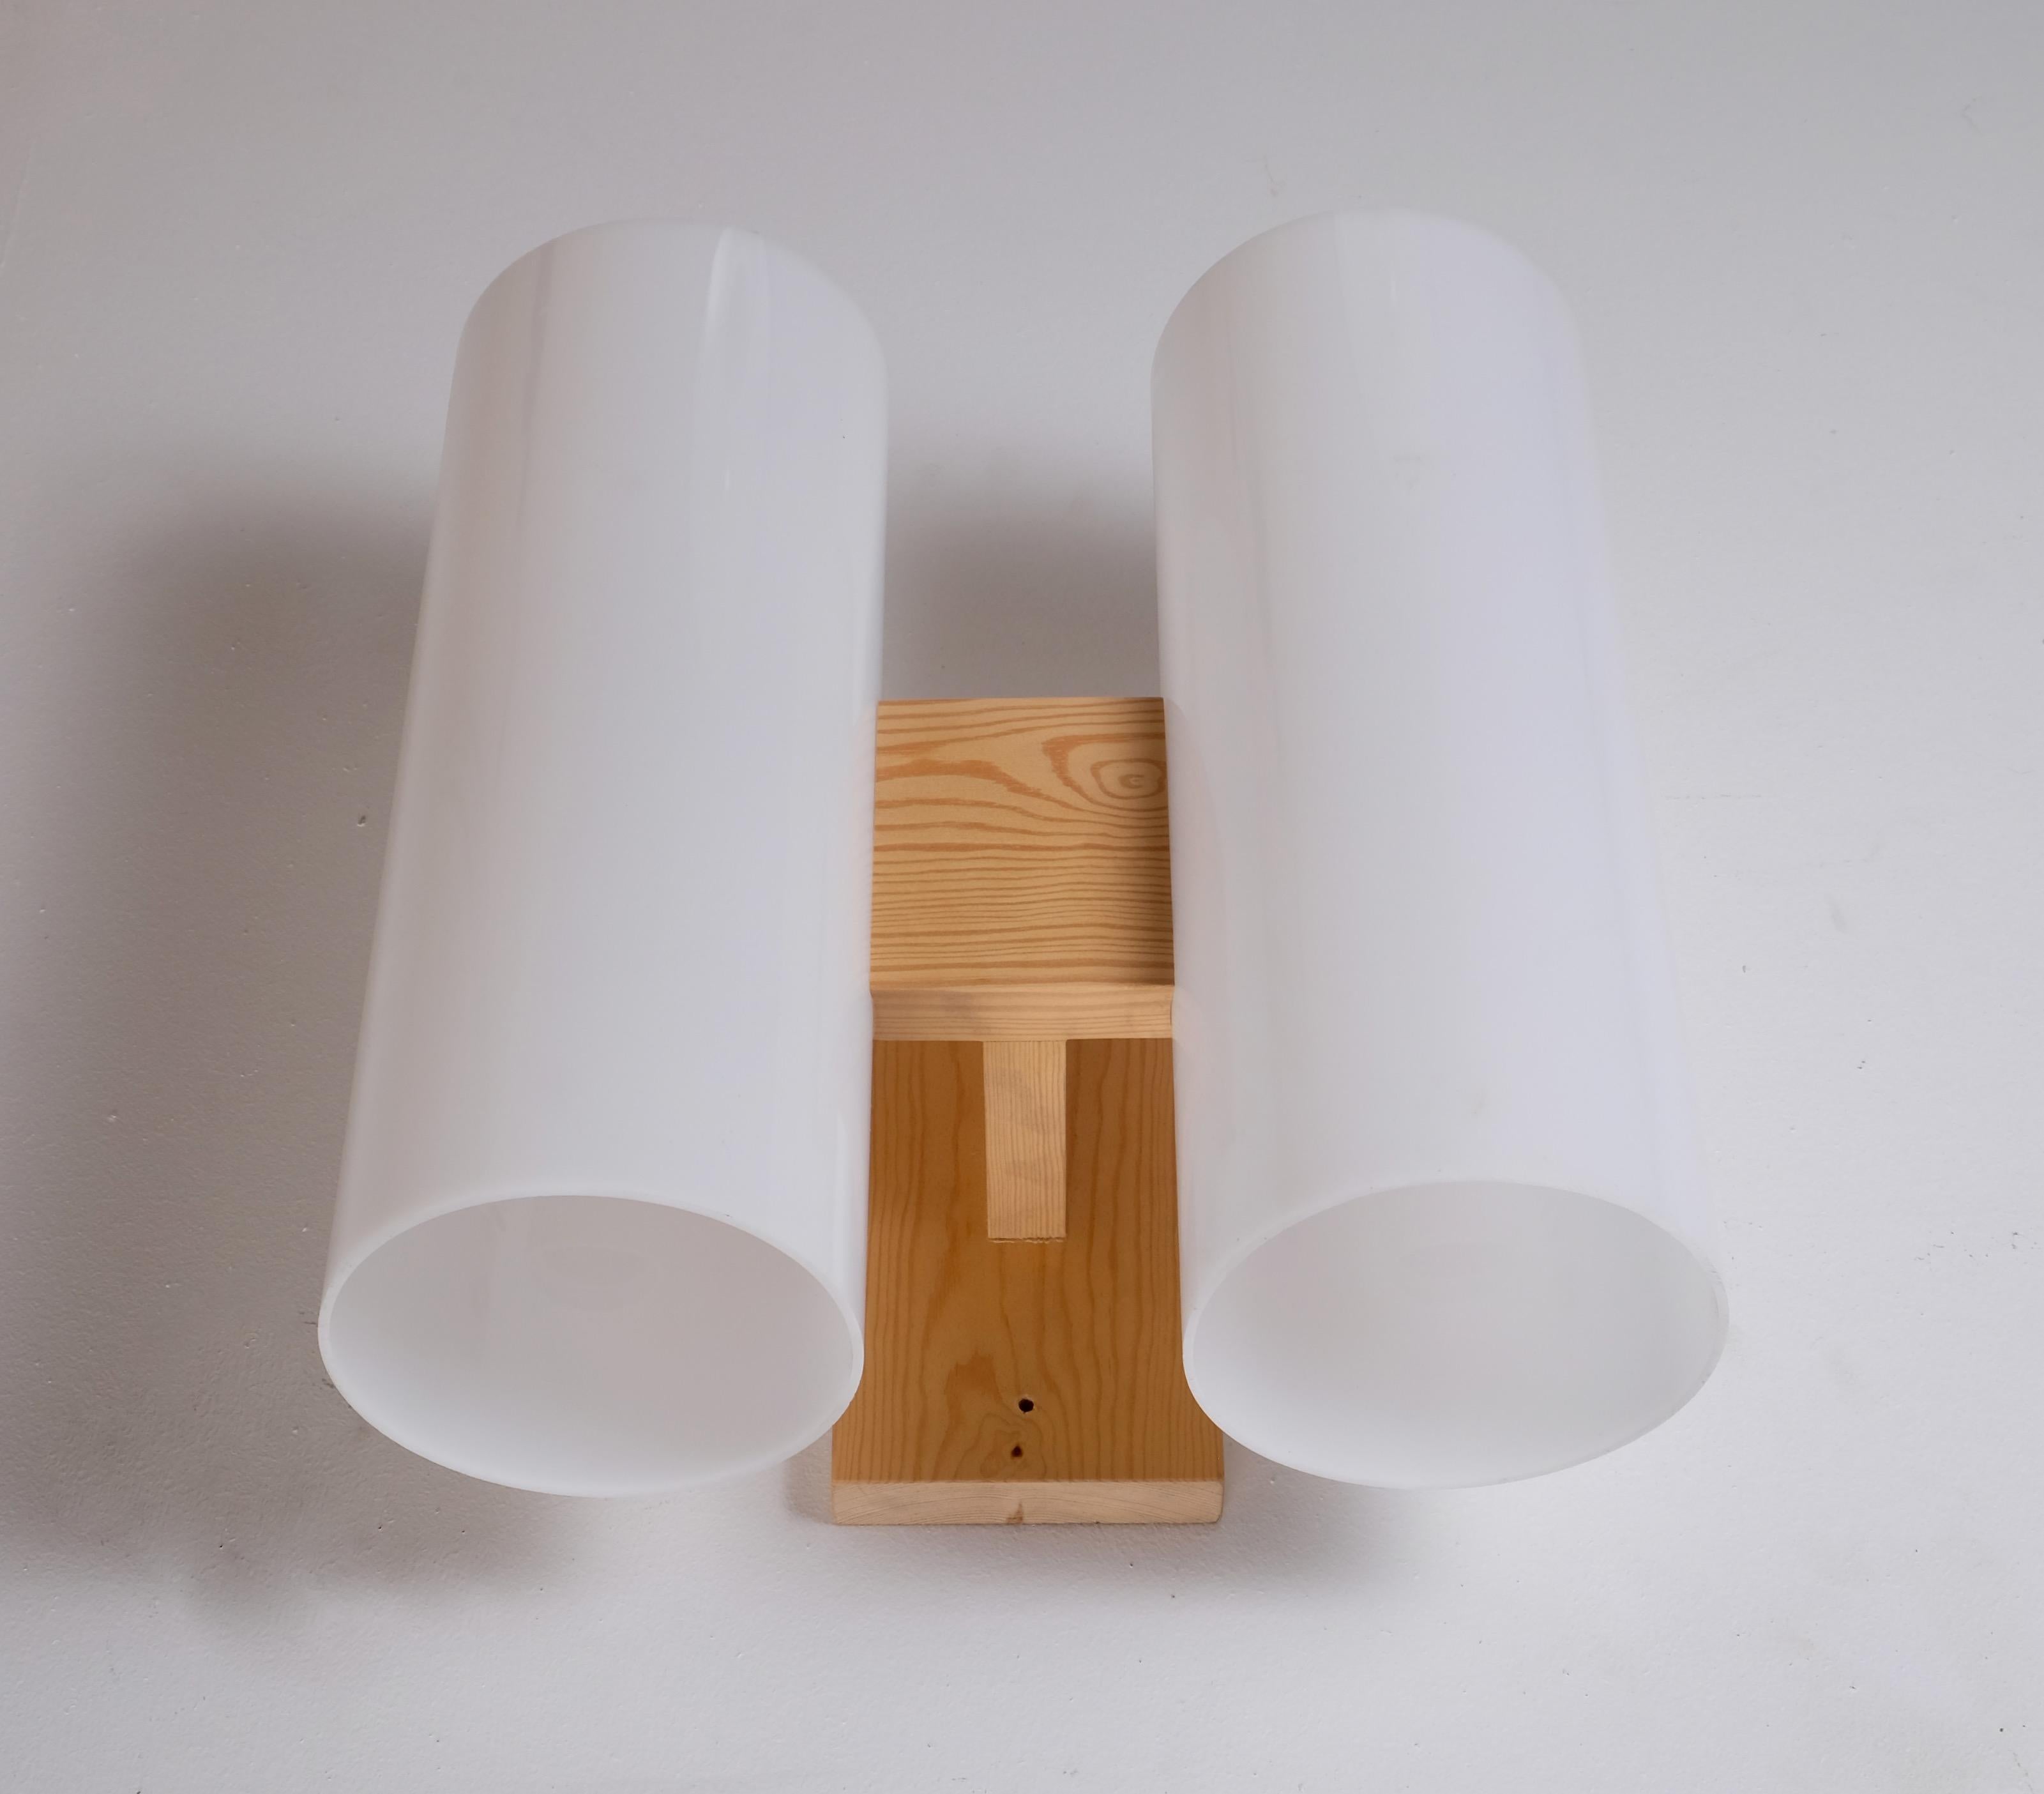 Design Uno & Östen Kristiansson produced by Luxus, Sweden. Solid pine and large acrylic shades.
Set of 6 available. Listed price is for a single wall light.
Measures: Height 40 cm.